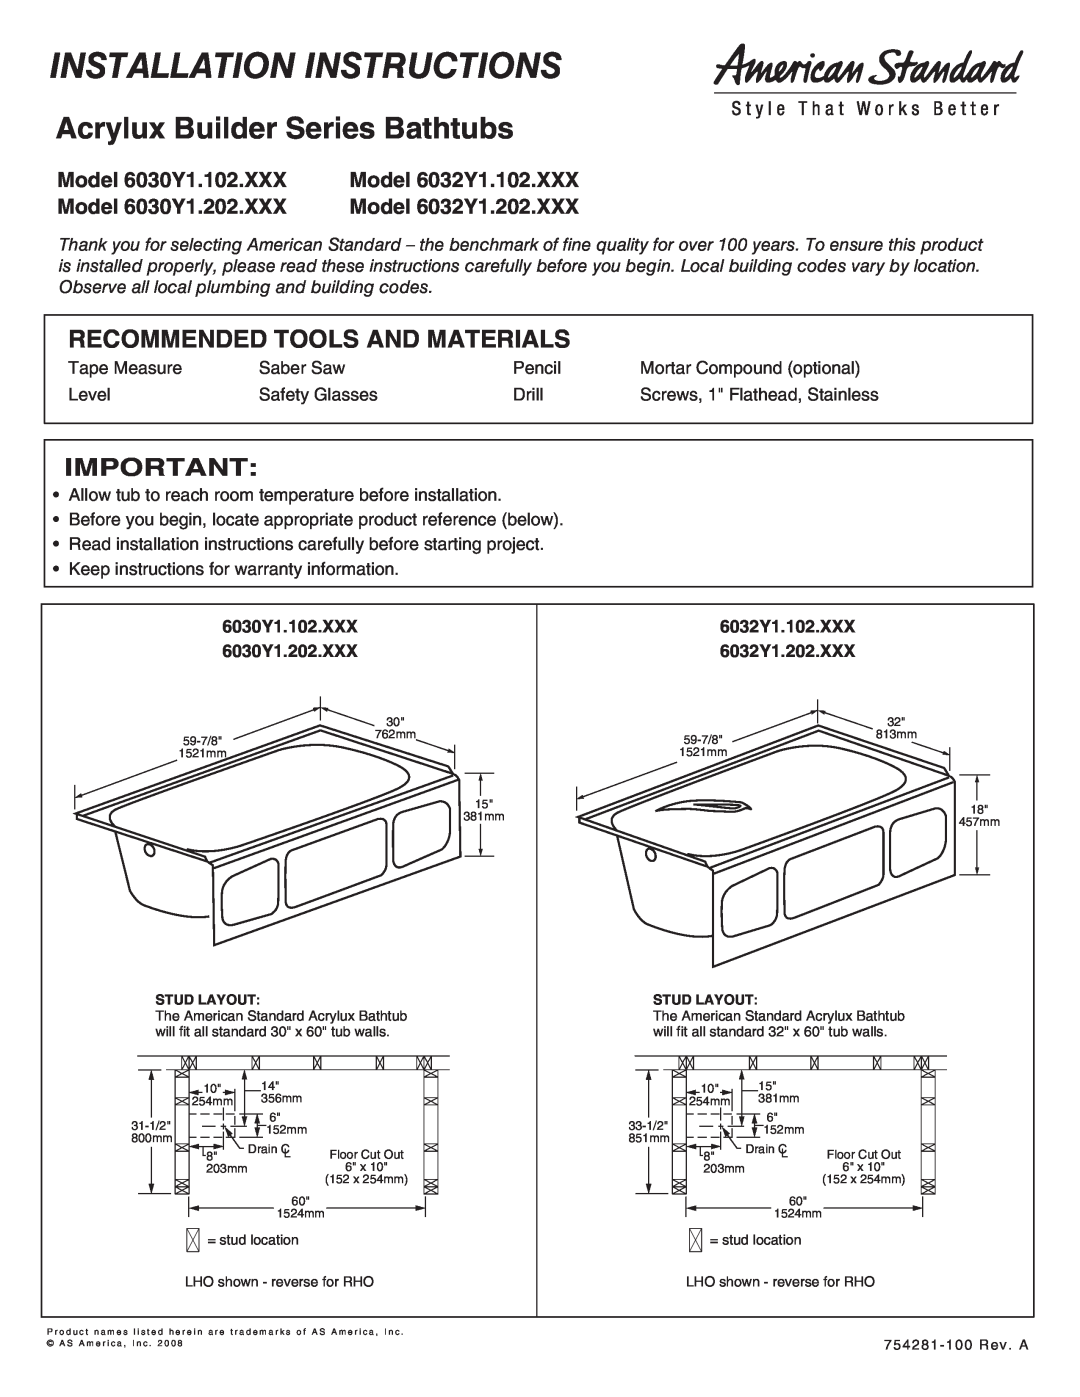 American Standard installation instructions Recommended Tools And Materials, Model 6030Y1.102.XXX, Model 6032Y1.102.XXX 